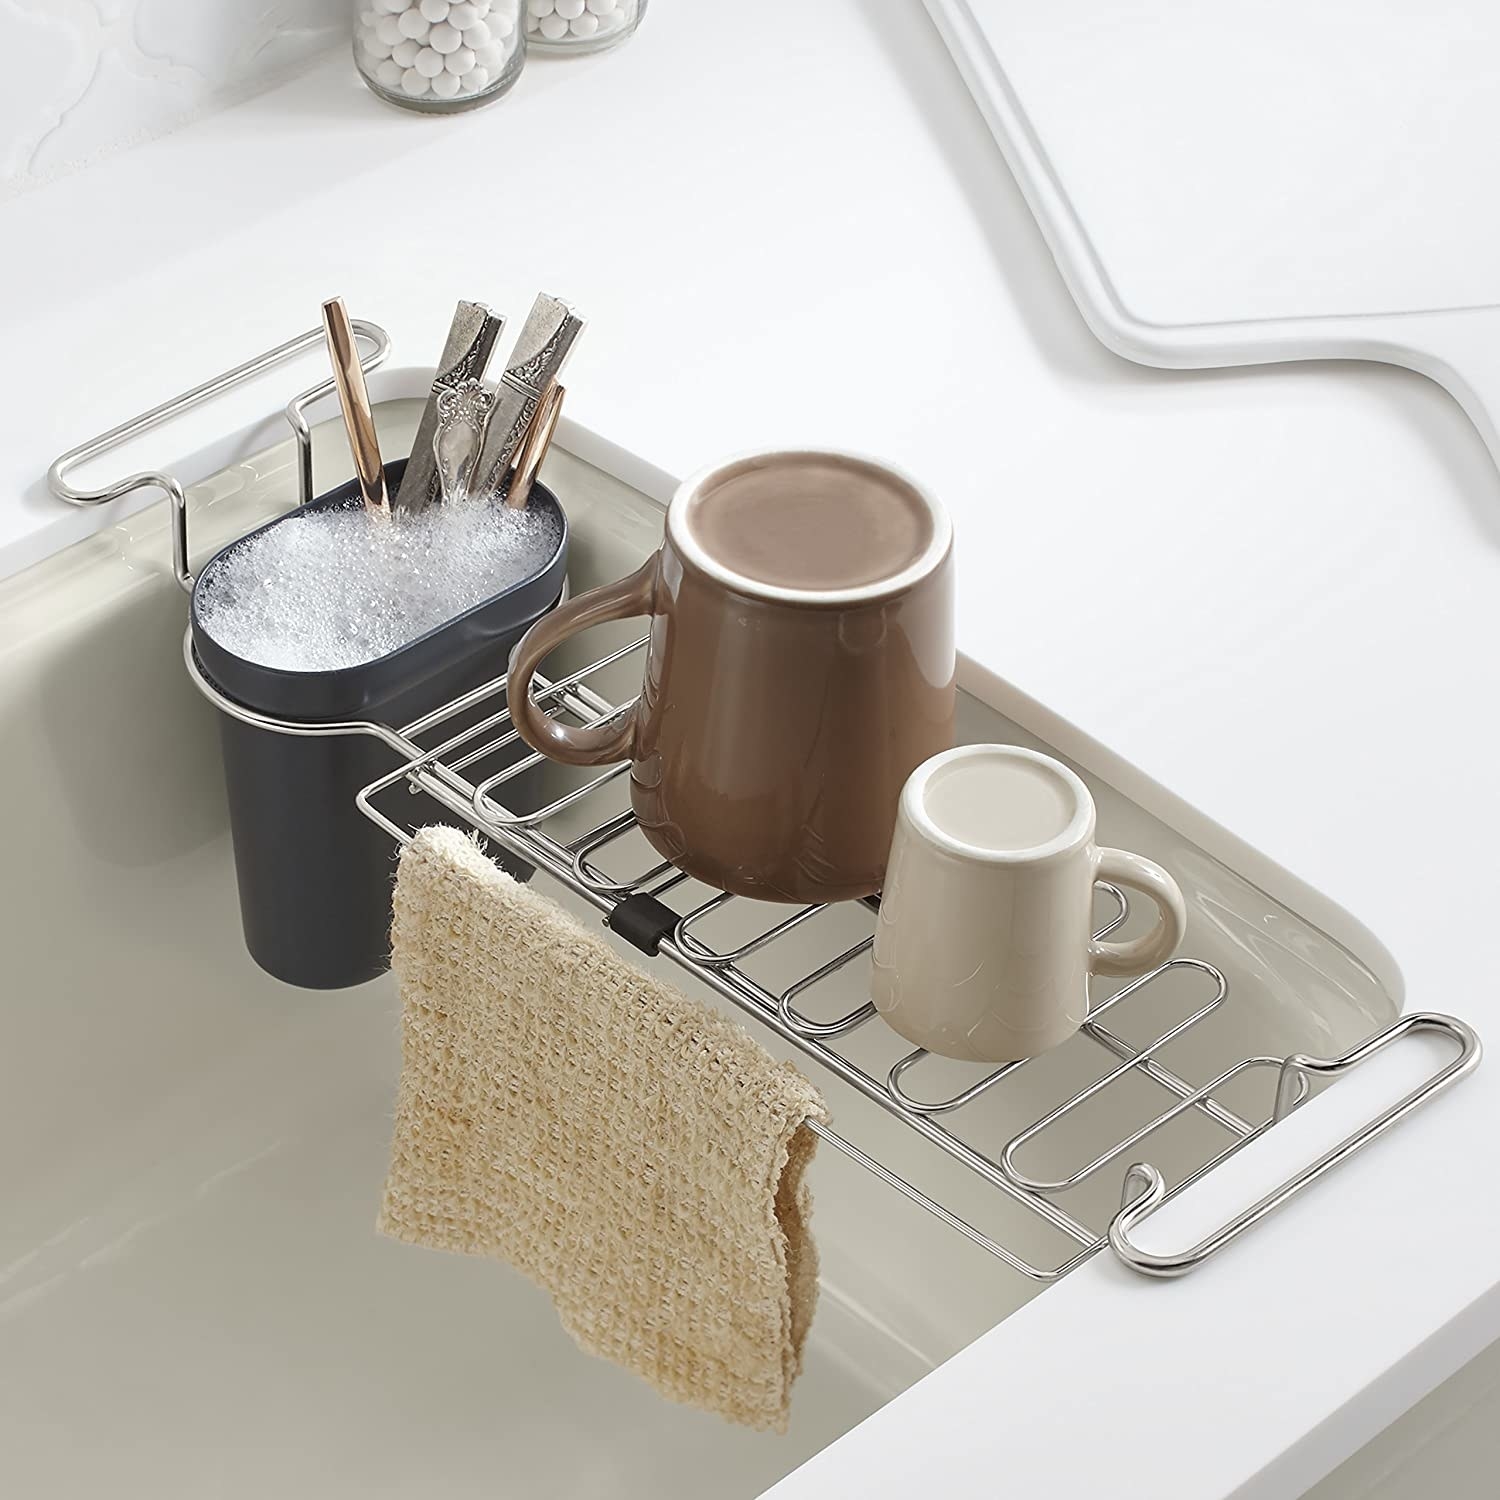 The rack with mugs on it and utensils soaking in the cup